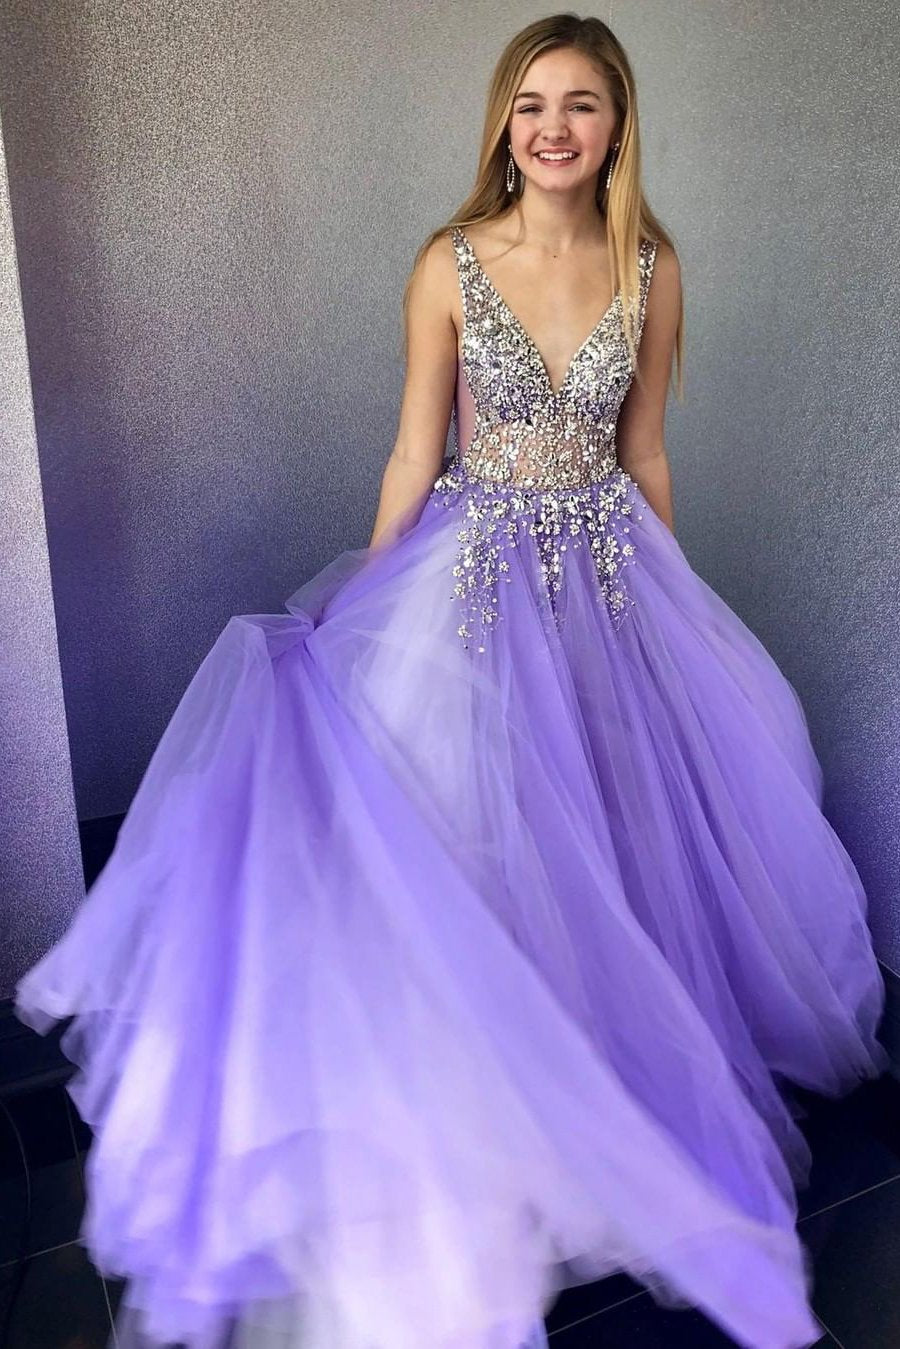 Elegant A Line Grey Long Prom Dress with Silver Appliques Tulle V Neck Party Dresses WK611